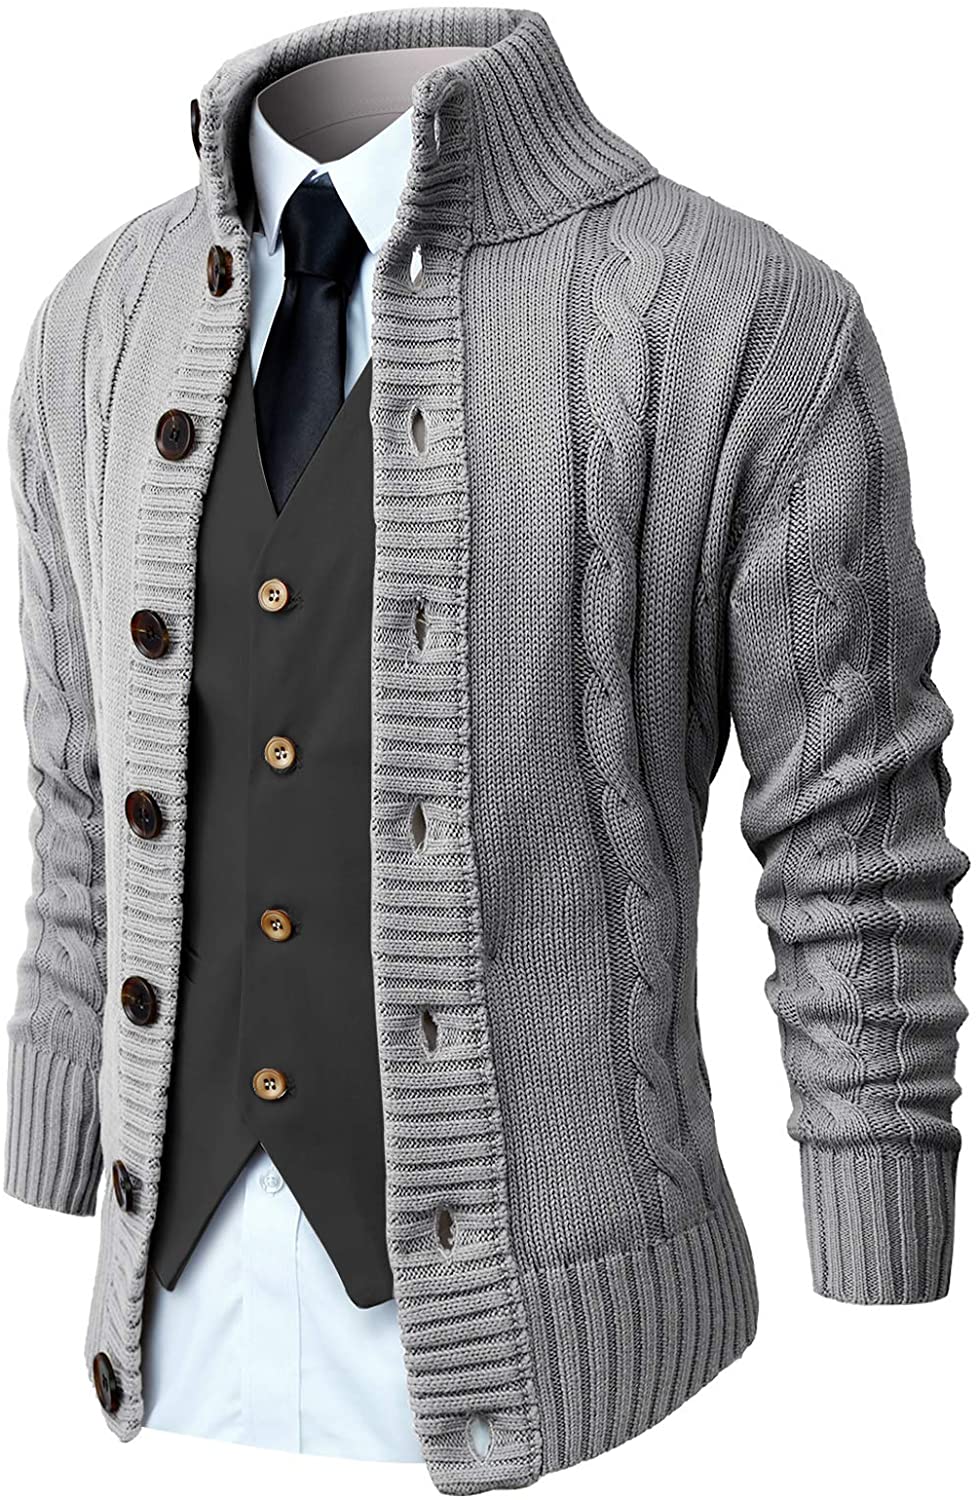 SELX Men Plus Size Button Down Knit Long Sleeve Stand Collar Sweaters Cardigan